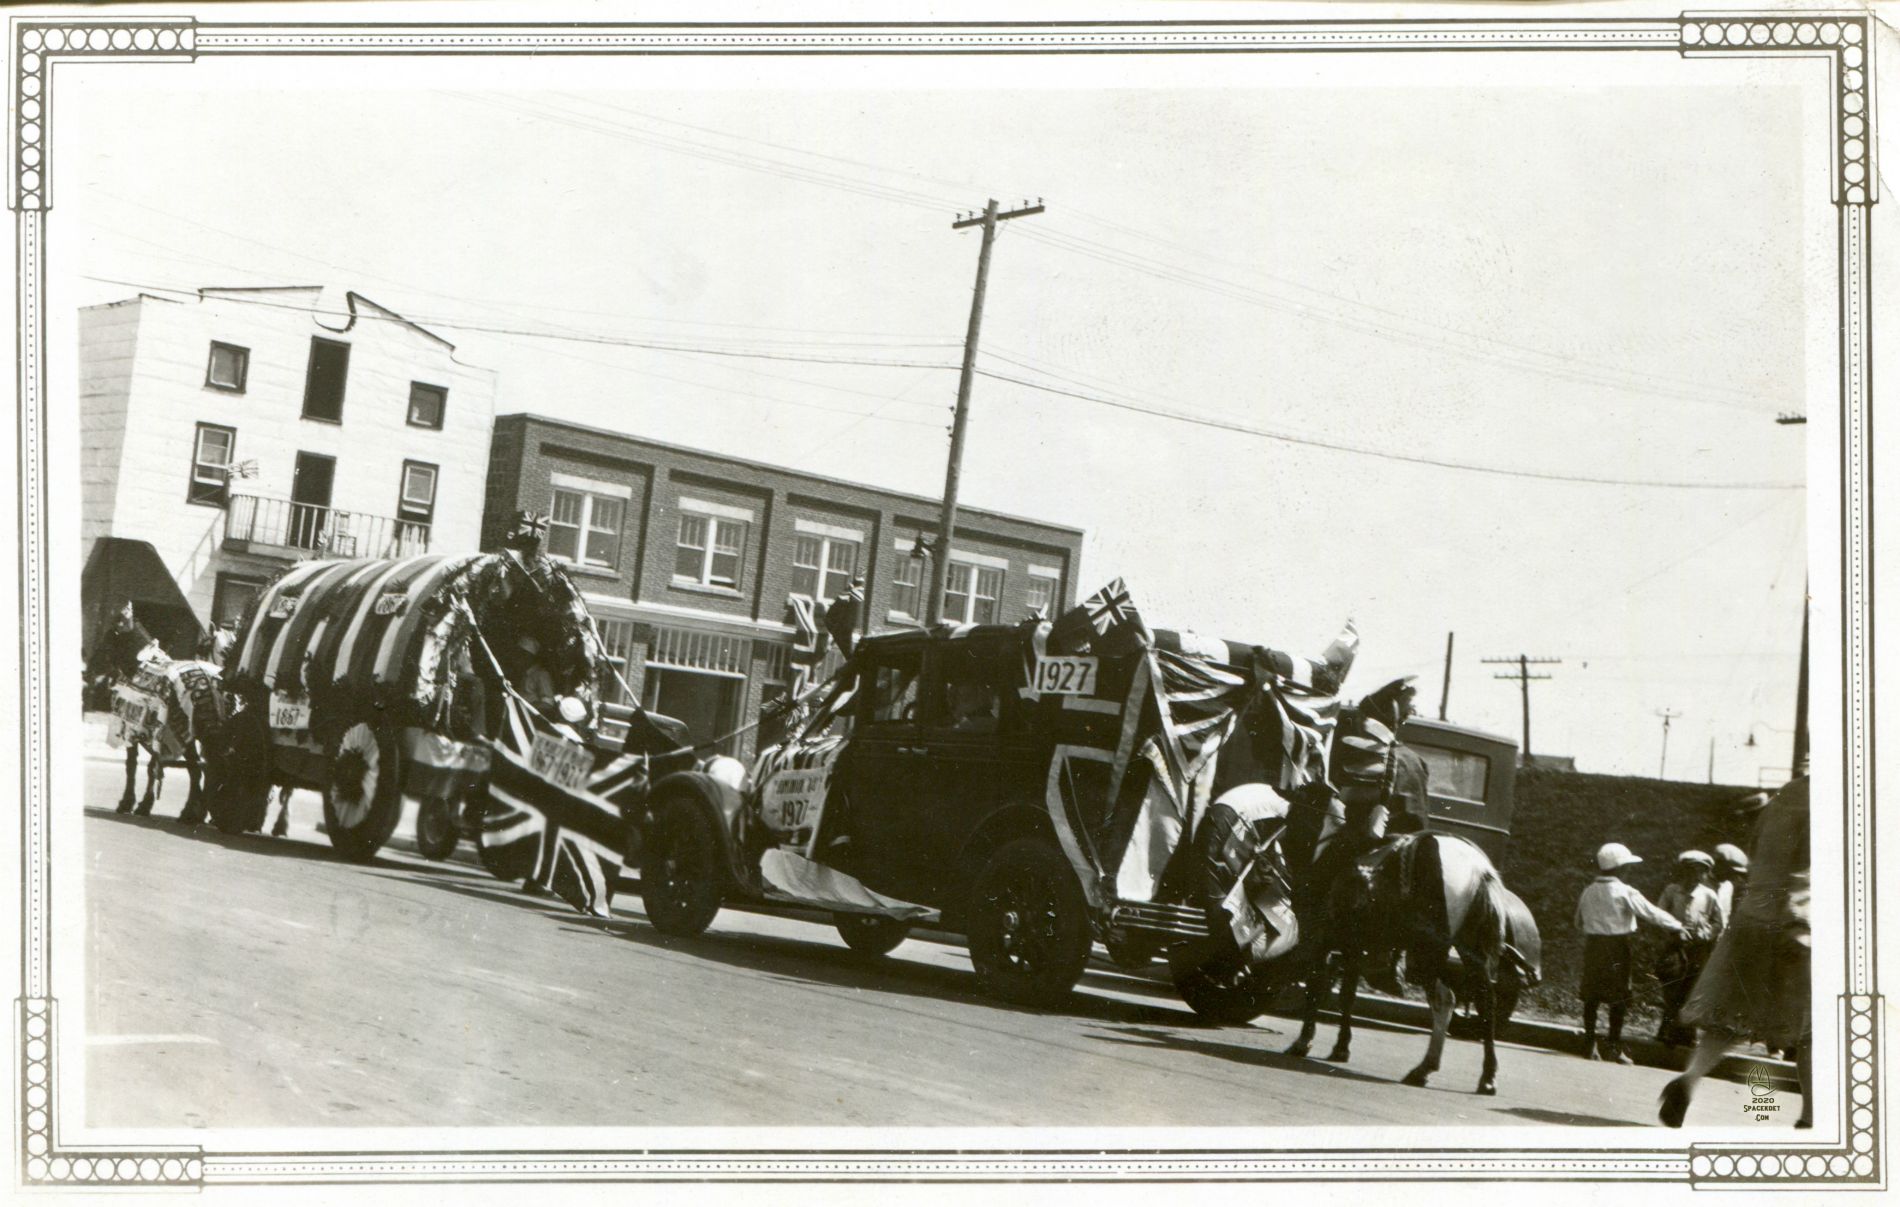 Celebrating 50 years of something with a parade. 1927